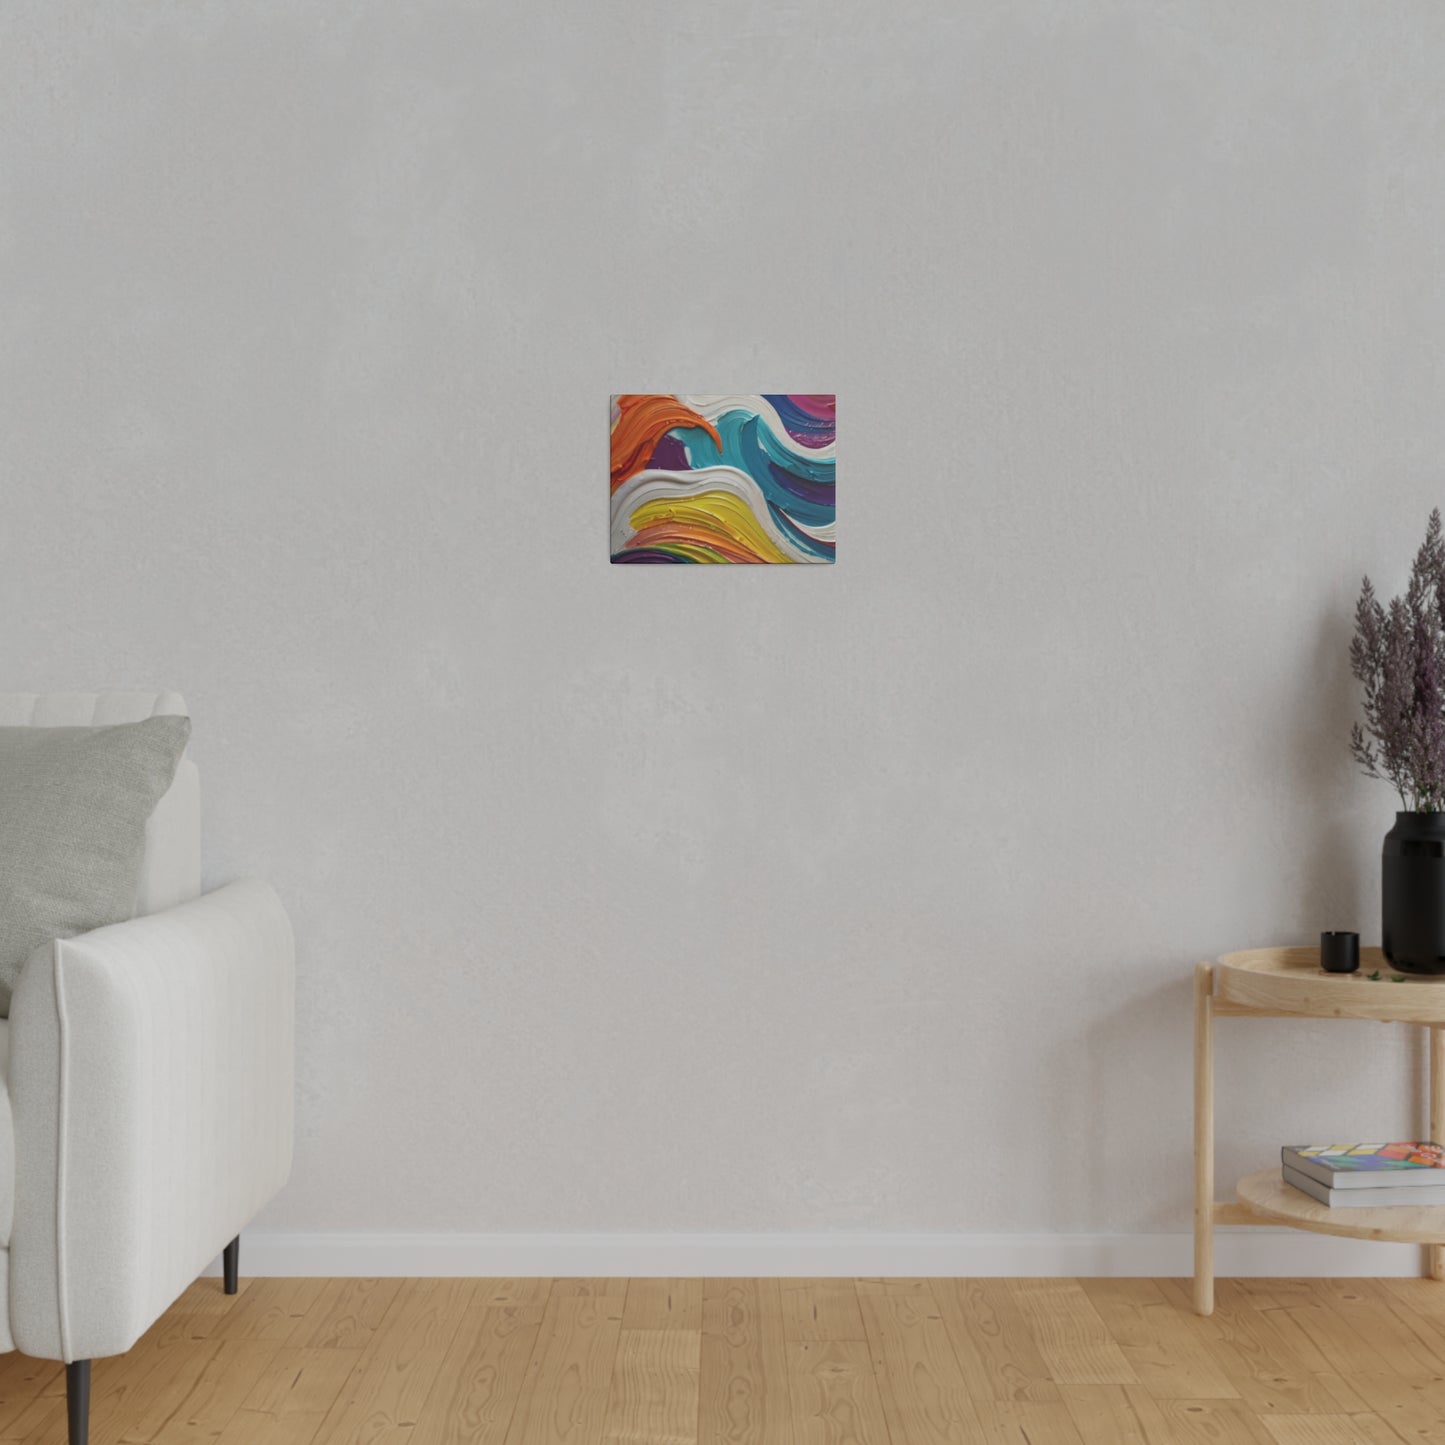 Messy Colourful Waves - Matte Canvas, Stretched, 0.75"